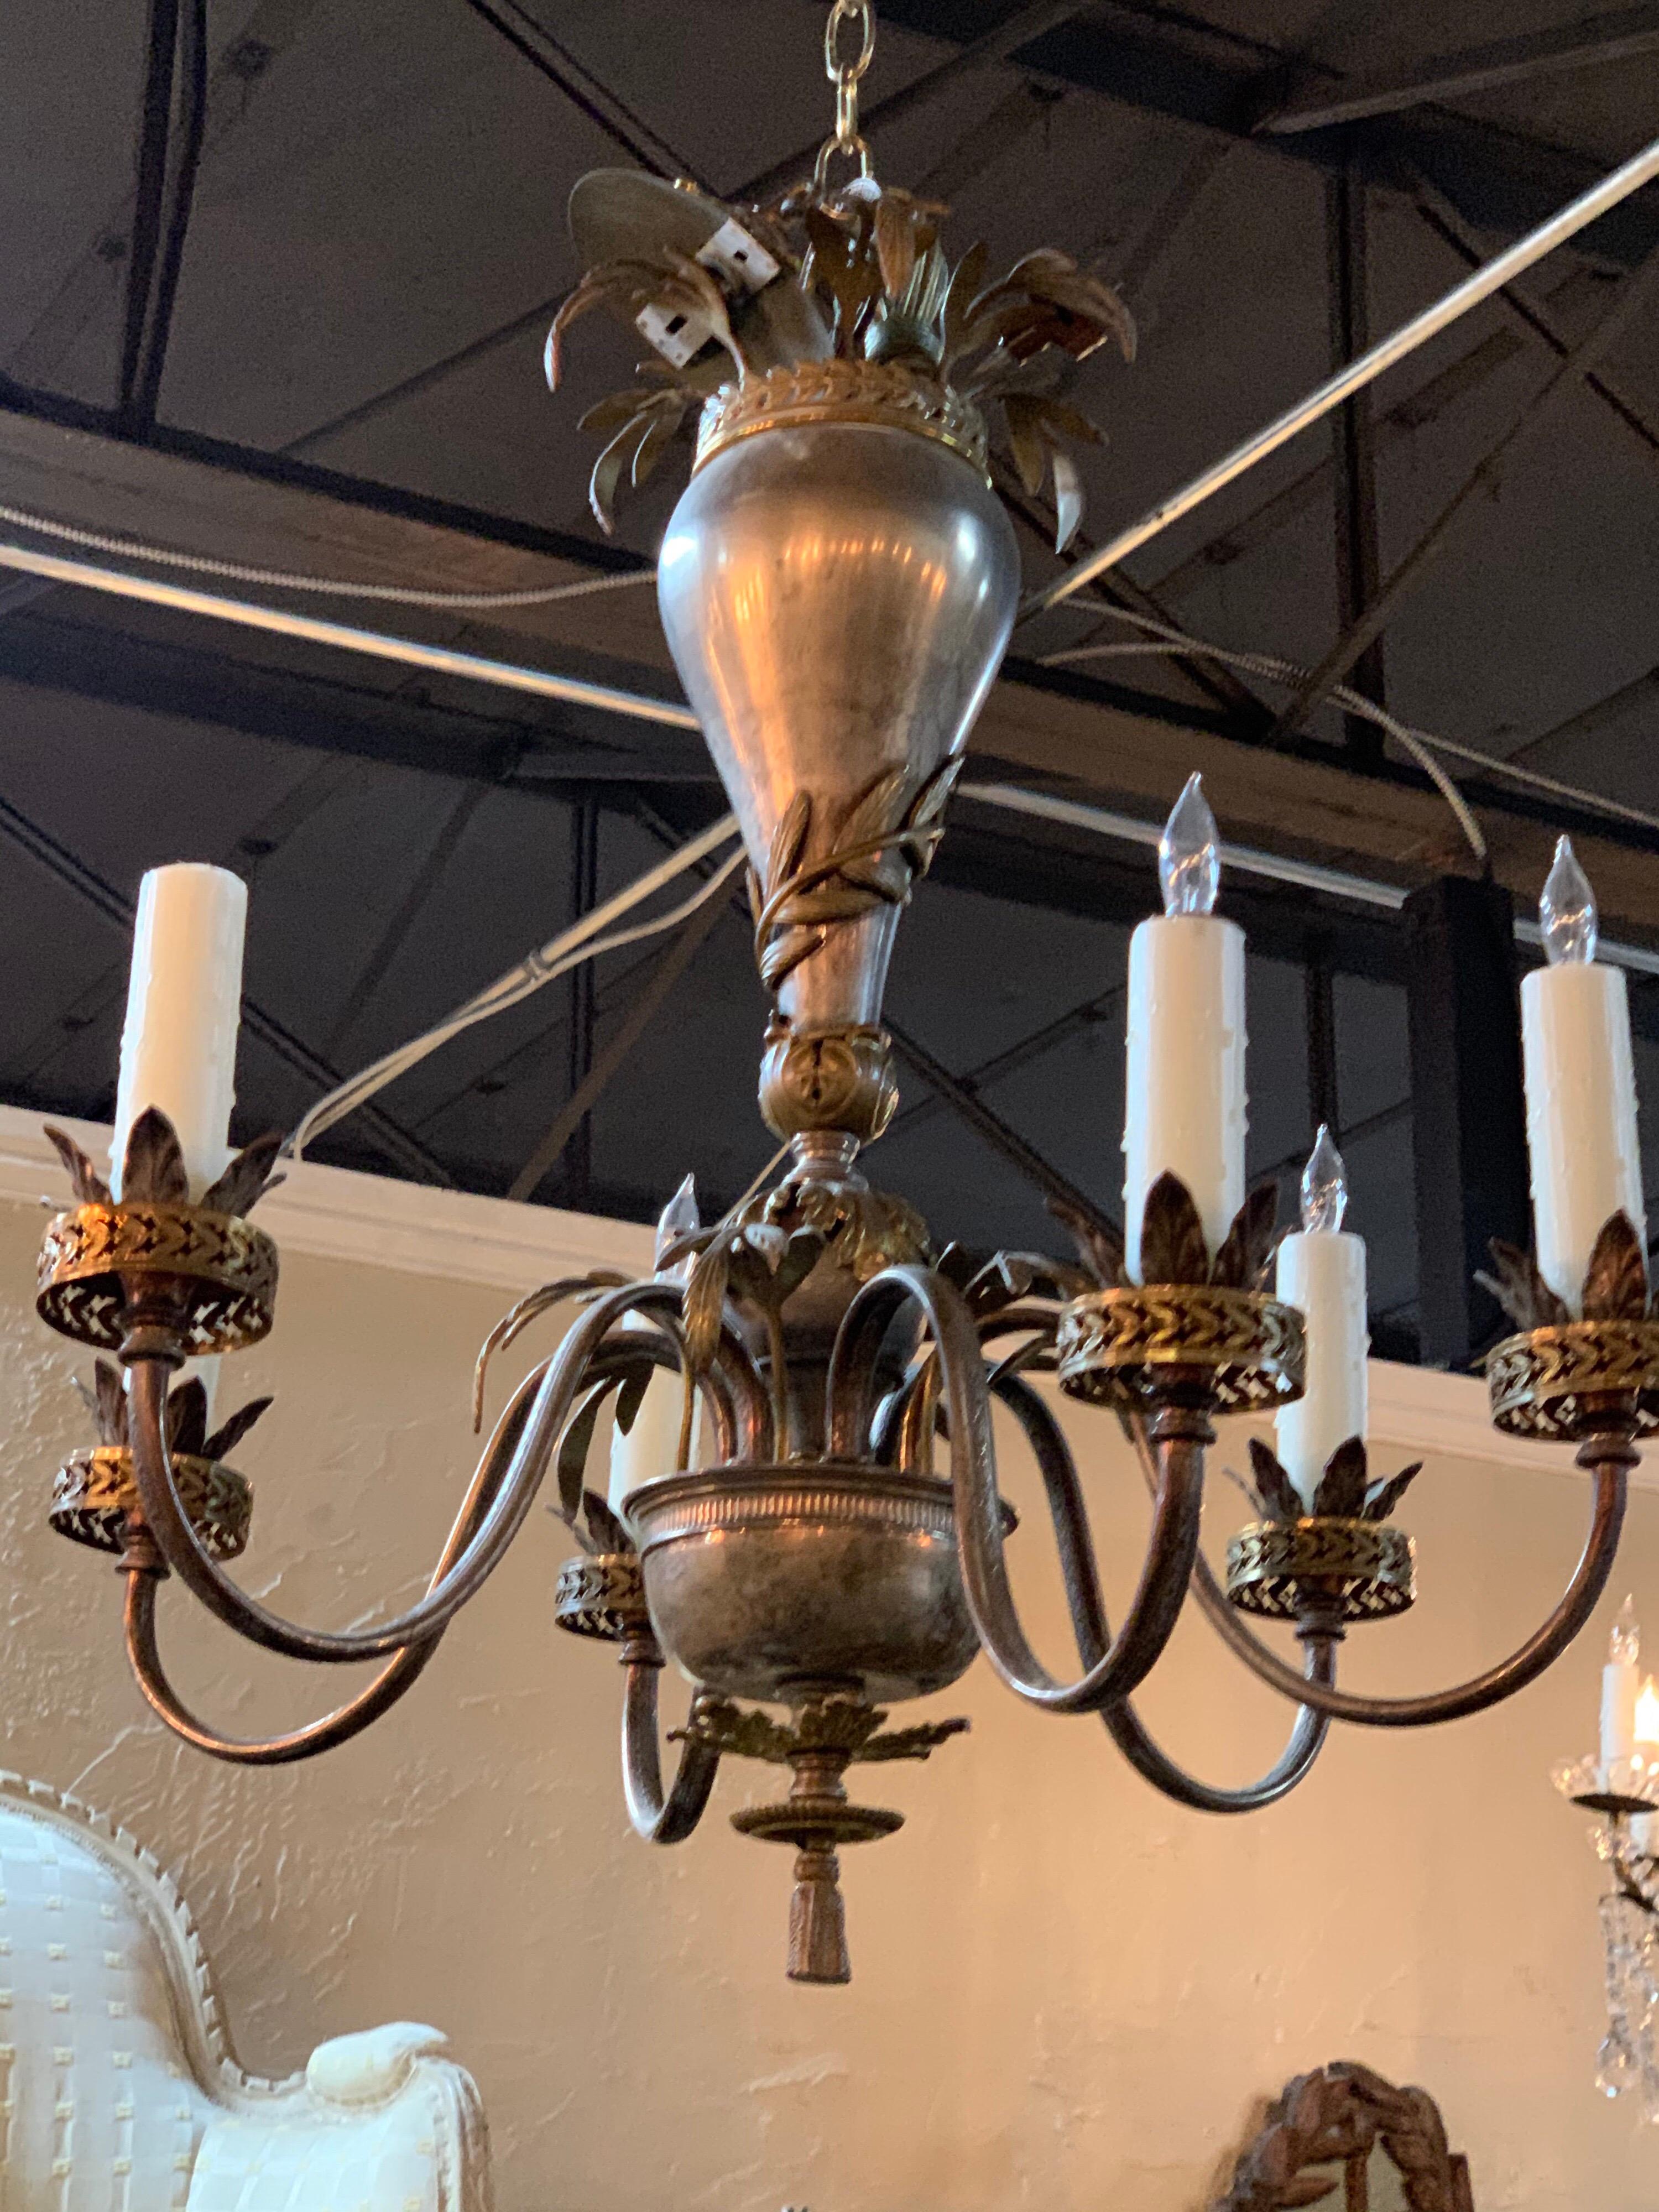 Very lovely 20th century Continental style silvered brass chandelier with 6 lights. Touches of gold remain on the decorative details. So pretty!